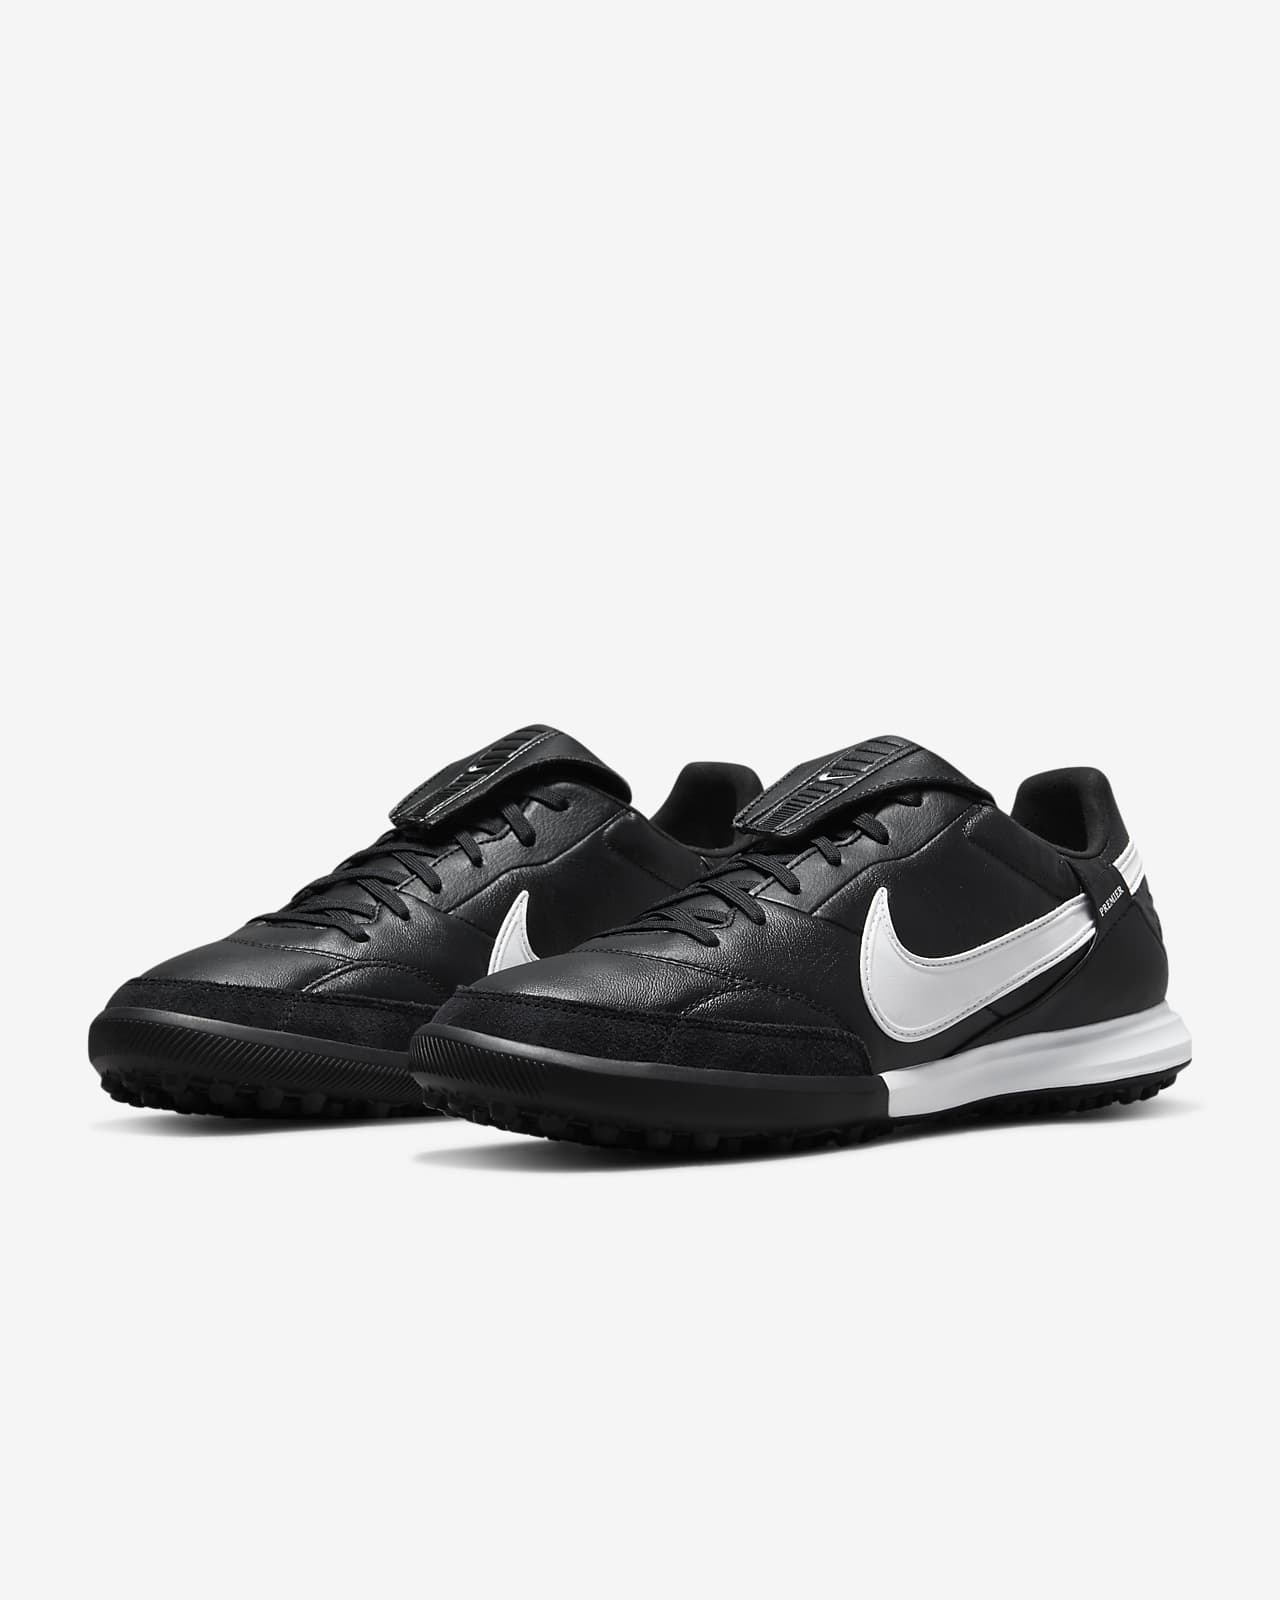 Nike Premier 3 TF Low-Top Soccer Shoes